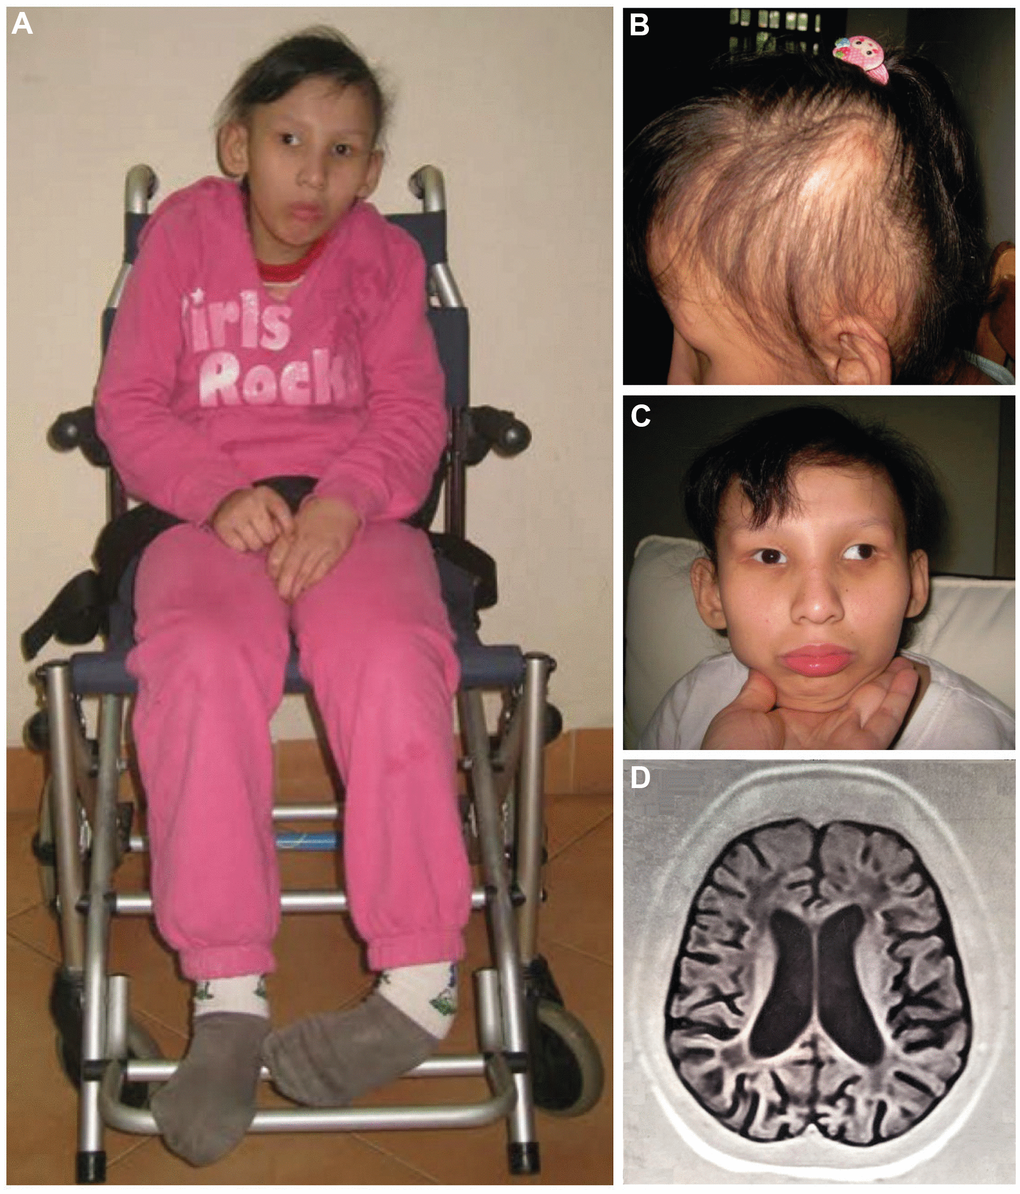 Proband at the age of 16 (A–C): (A) Full length figure of the proband, thinning hair (B) and strabismus at front vision (C) were observed. Brain T1-weighted MRI image at the age of 14 years (D).